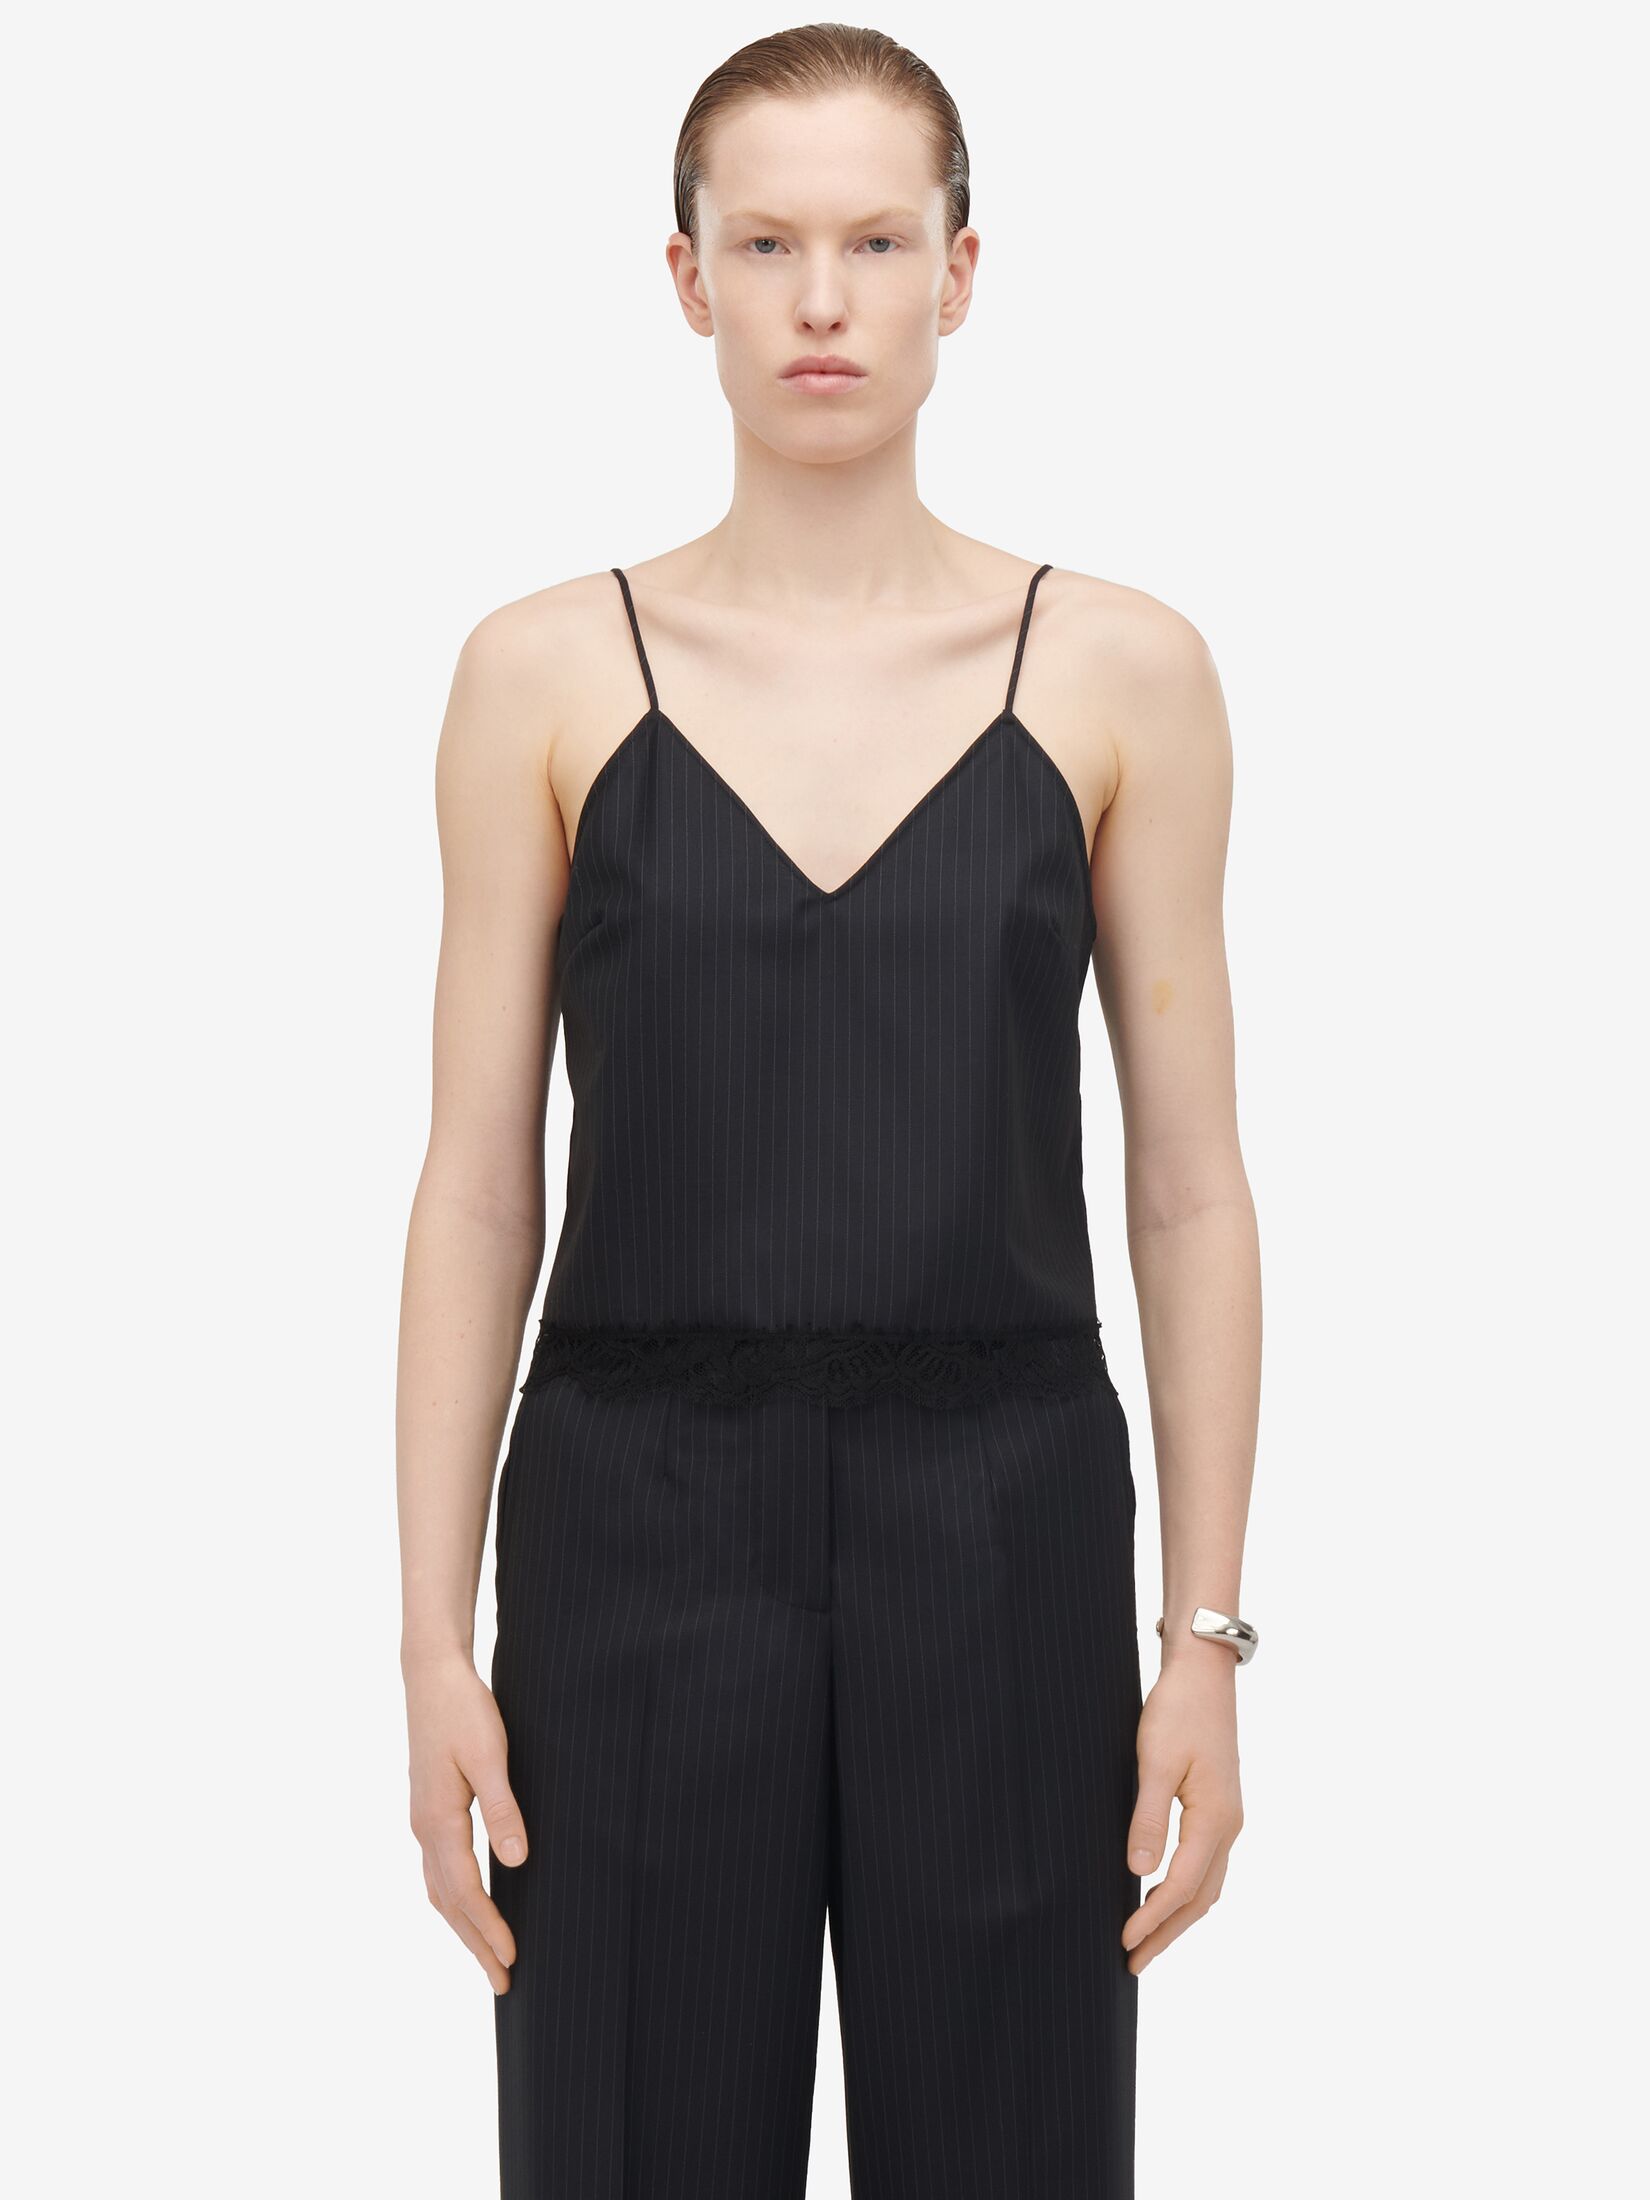 Lace Detail Pinstripe Camisole